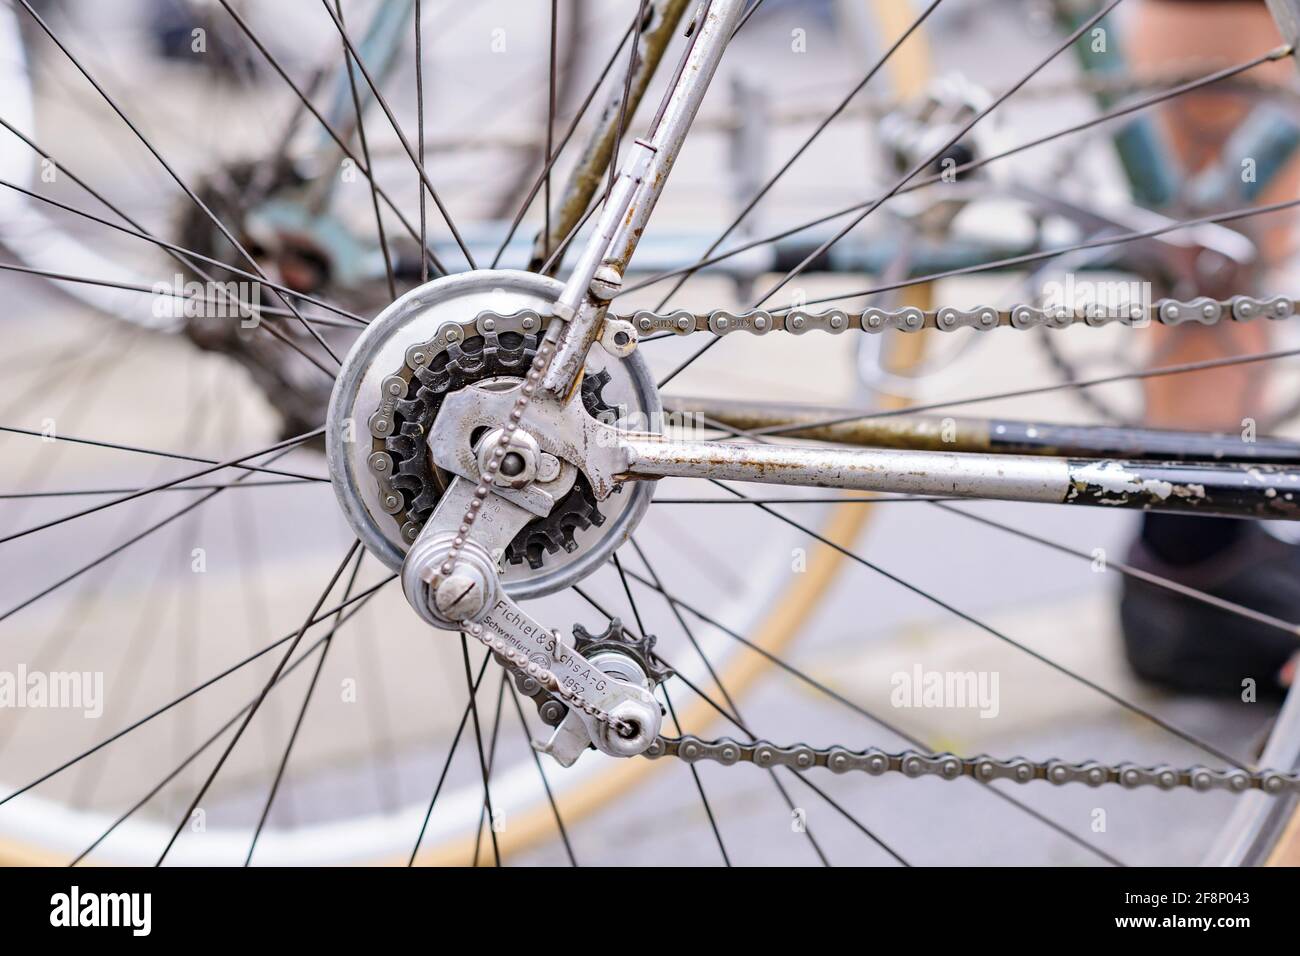 niedersulz, austria, 12 june 2016, classic gear shift fichtel and sachs on  an old road bike at the vintage bicycle event in velo veritas Stock Photo -  Alamy